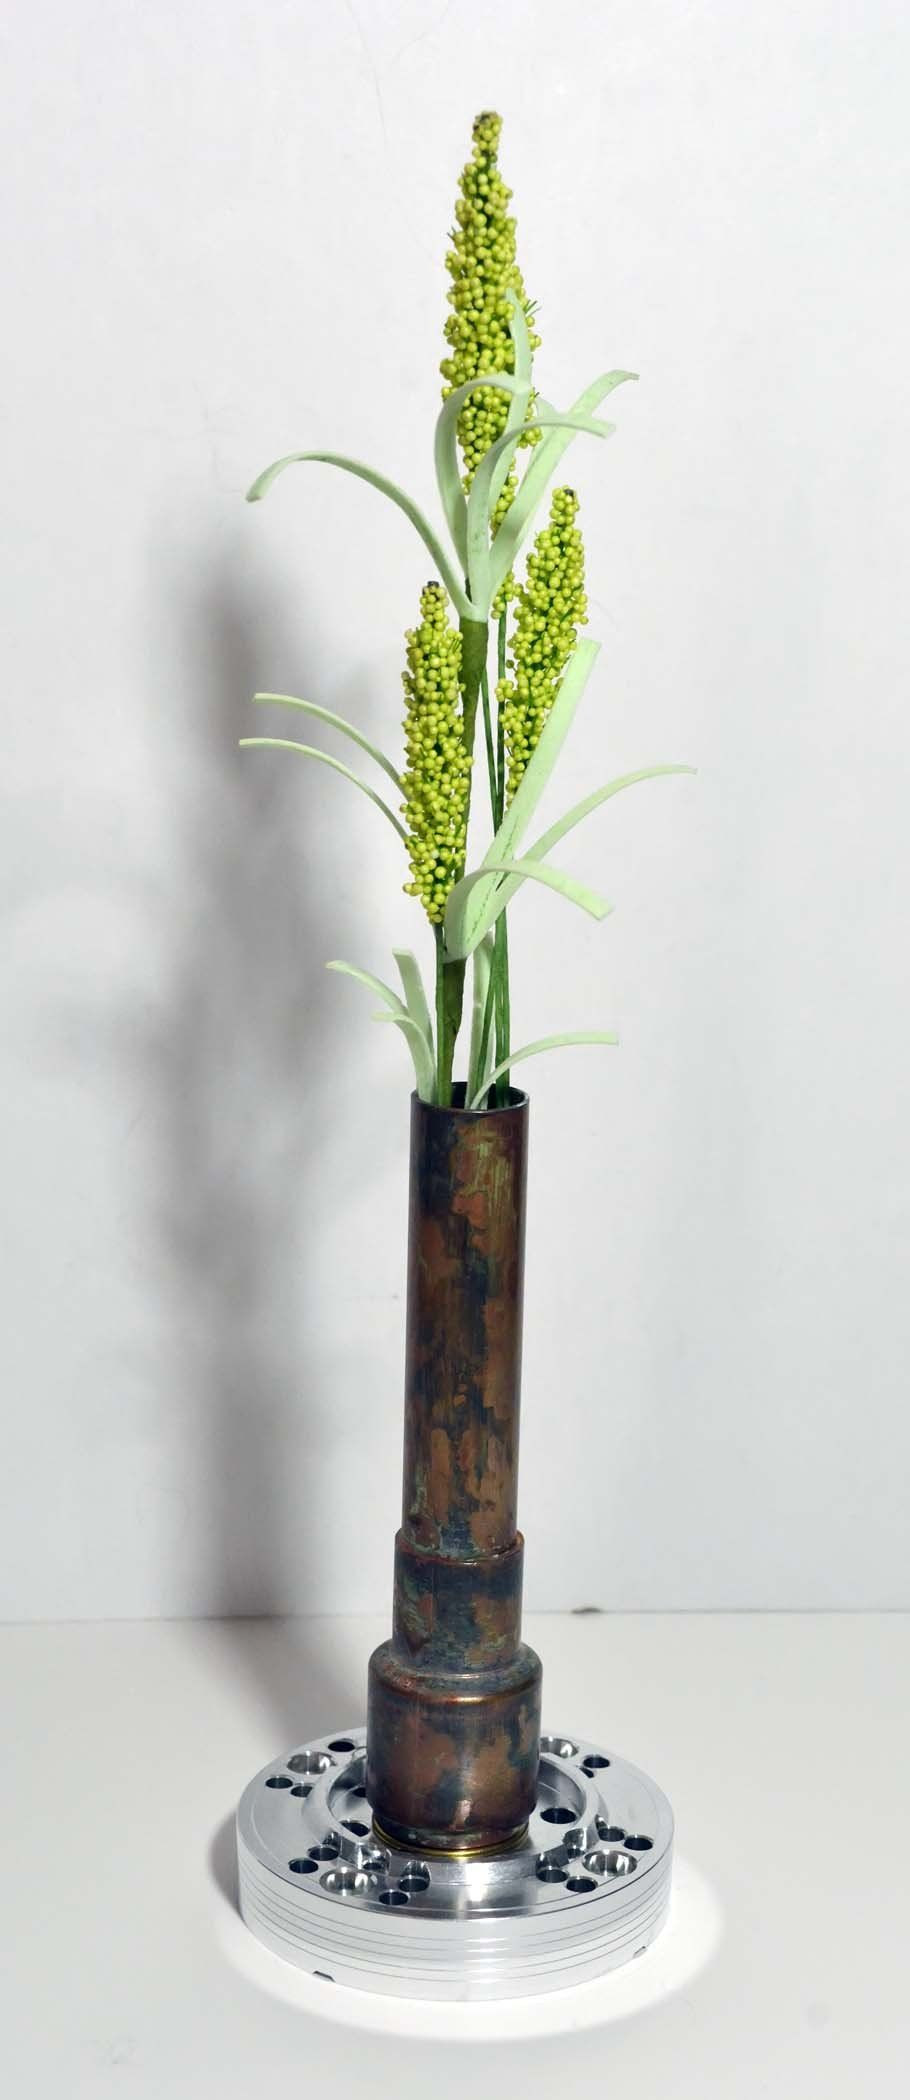 26 Cute Mini Bud Vases 2024 free download mini bud vases of steampunk style decorative dried bud vase made from recycled with regard to steampunk style decorative dried bud vase made from recycled materials vintage chemistry lab bun